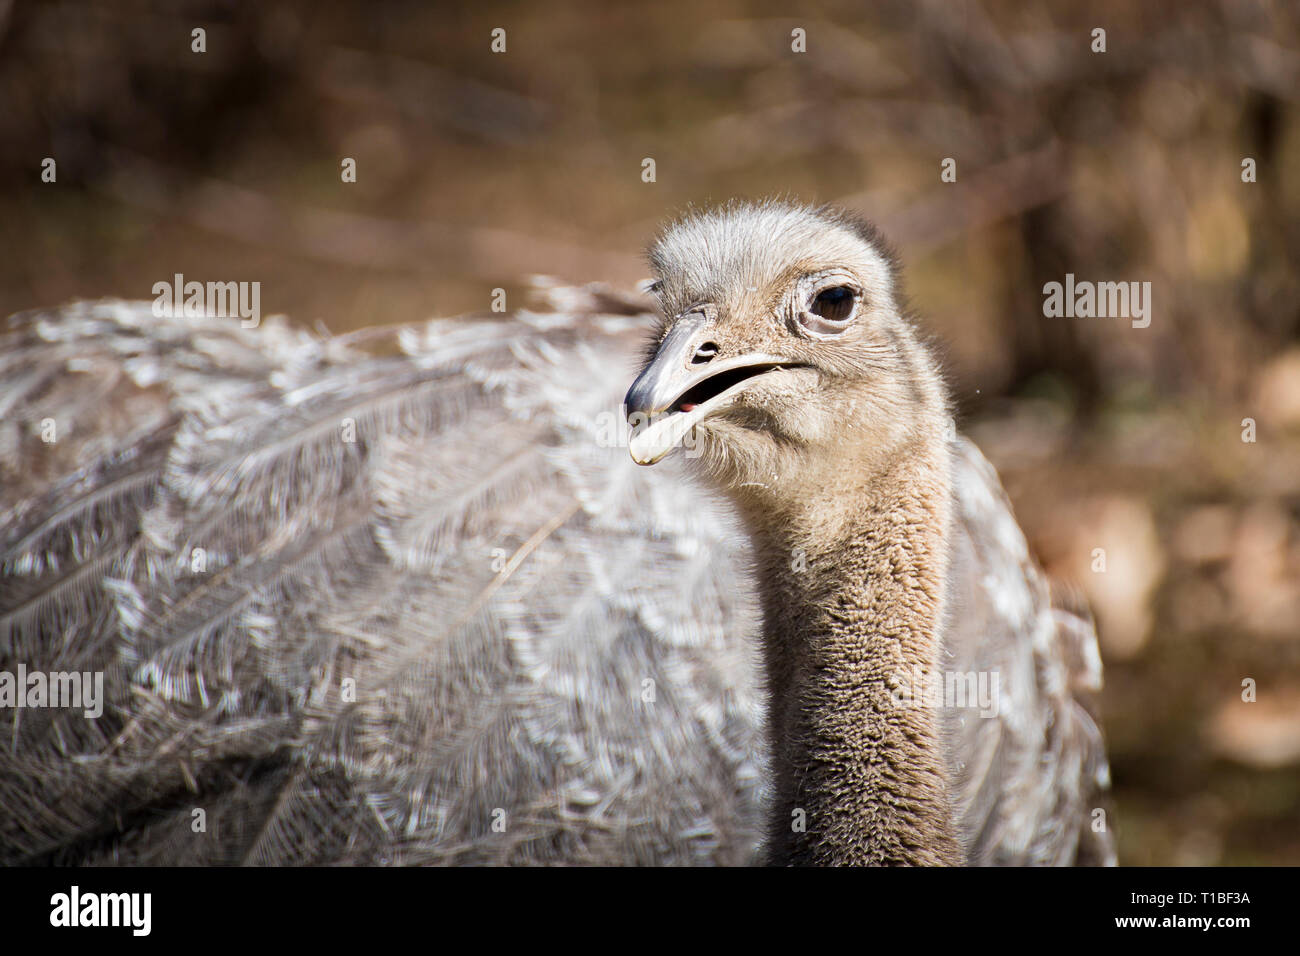 Close up portrait of Darwin's rhea (Rhea pennata), also known as the lesser rhea, looking at camera with open beak. Stock Photo